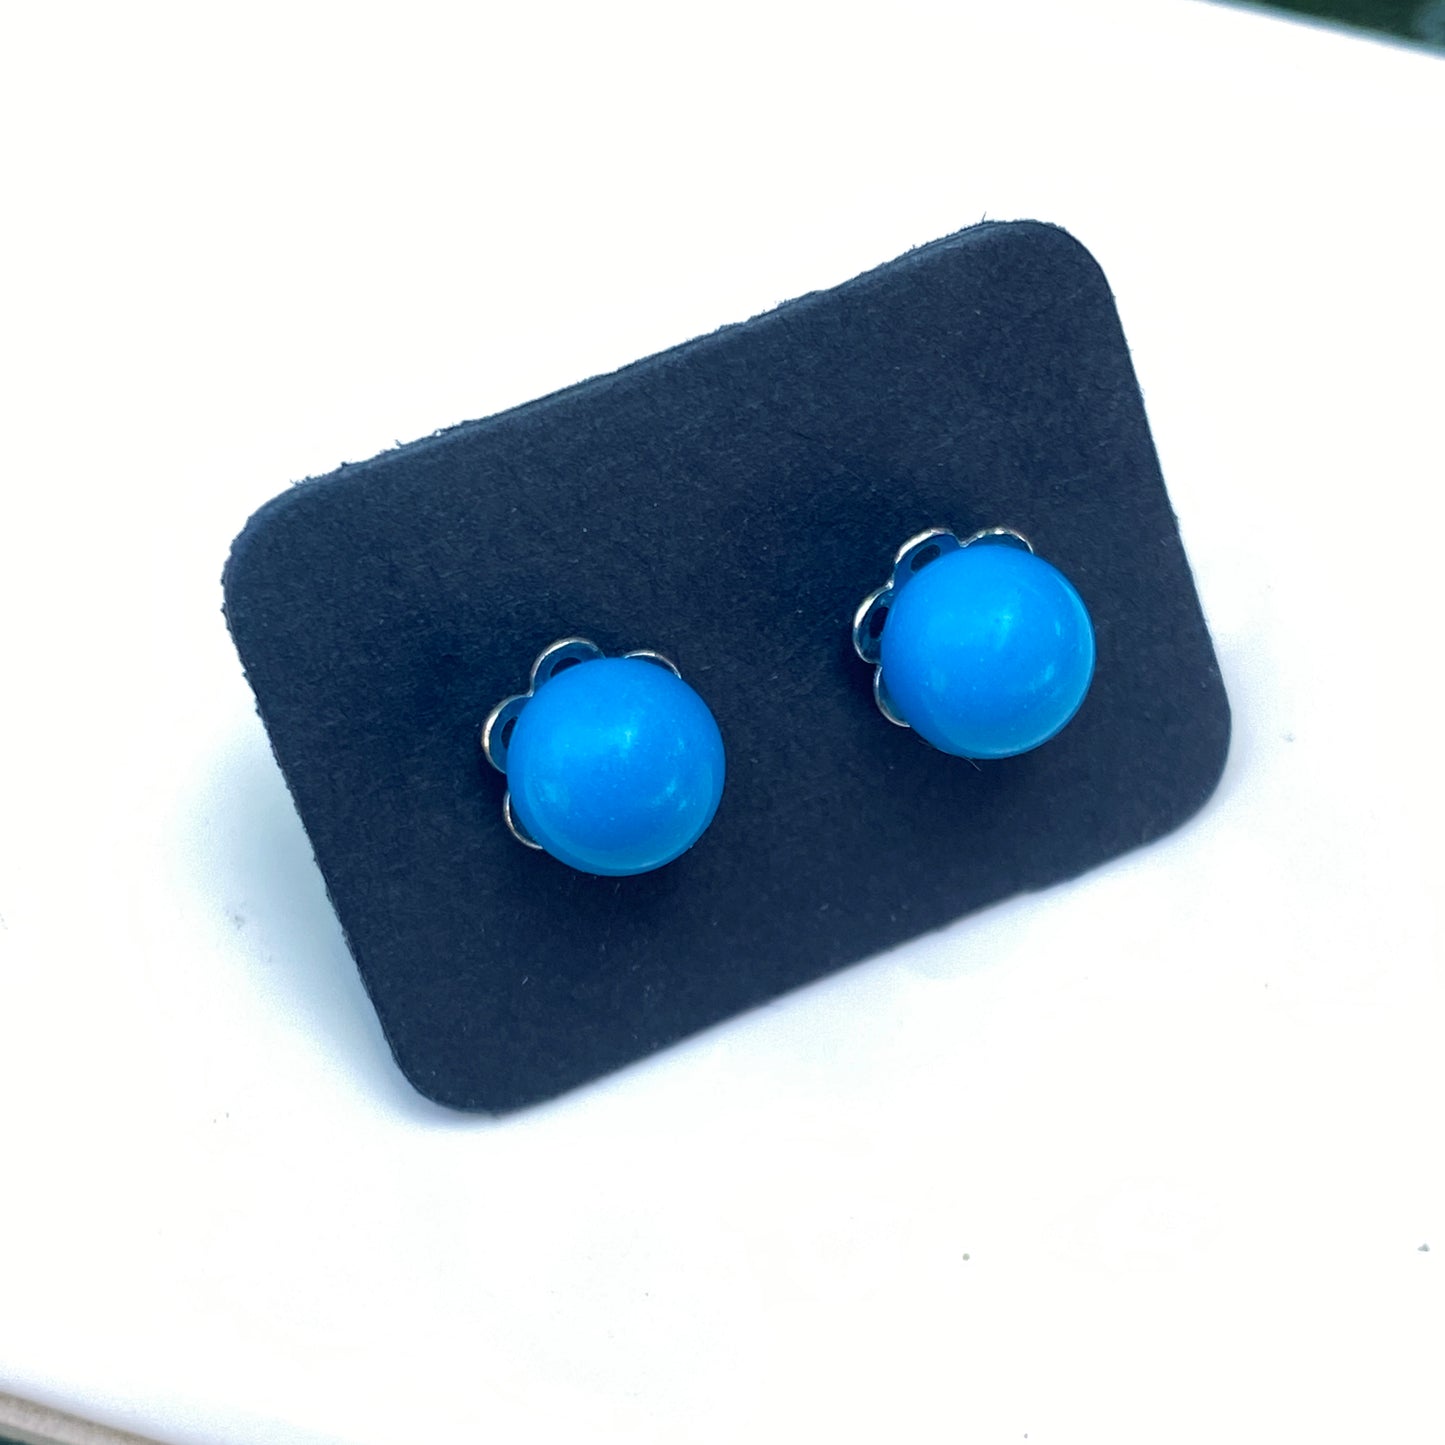 Genuine Sleeping Beauty Turquoise 8 mm Studs on Sterling Silver posts